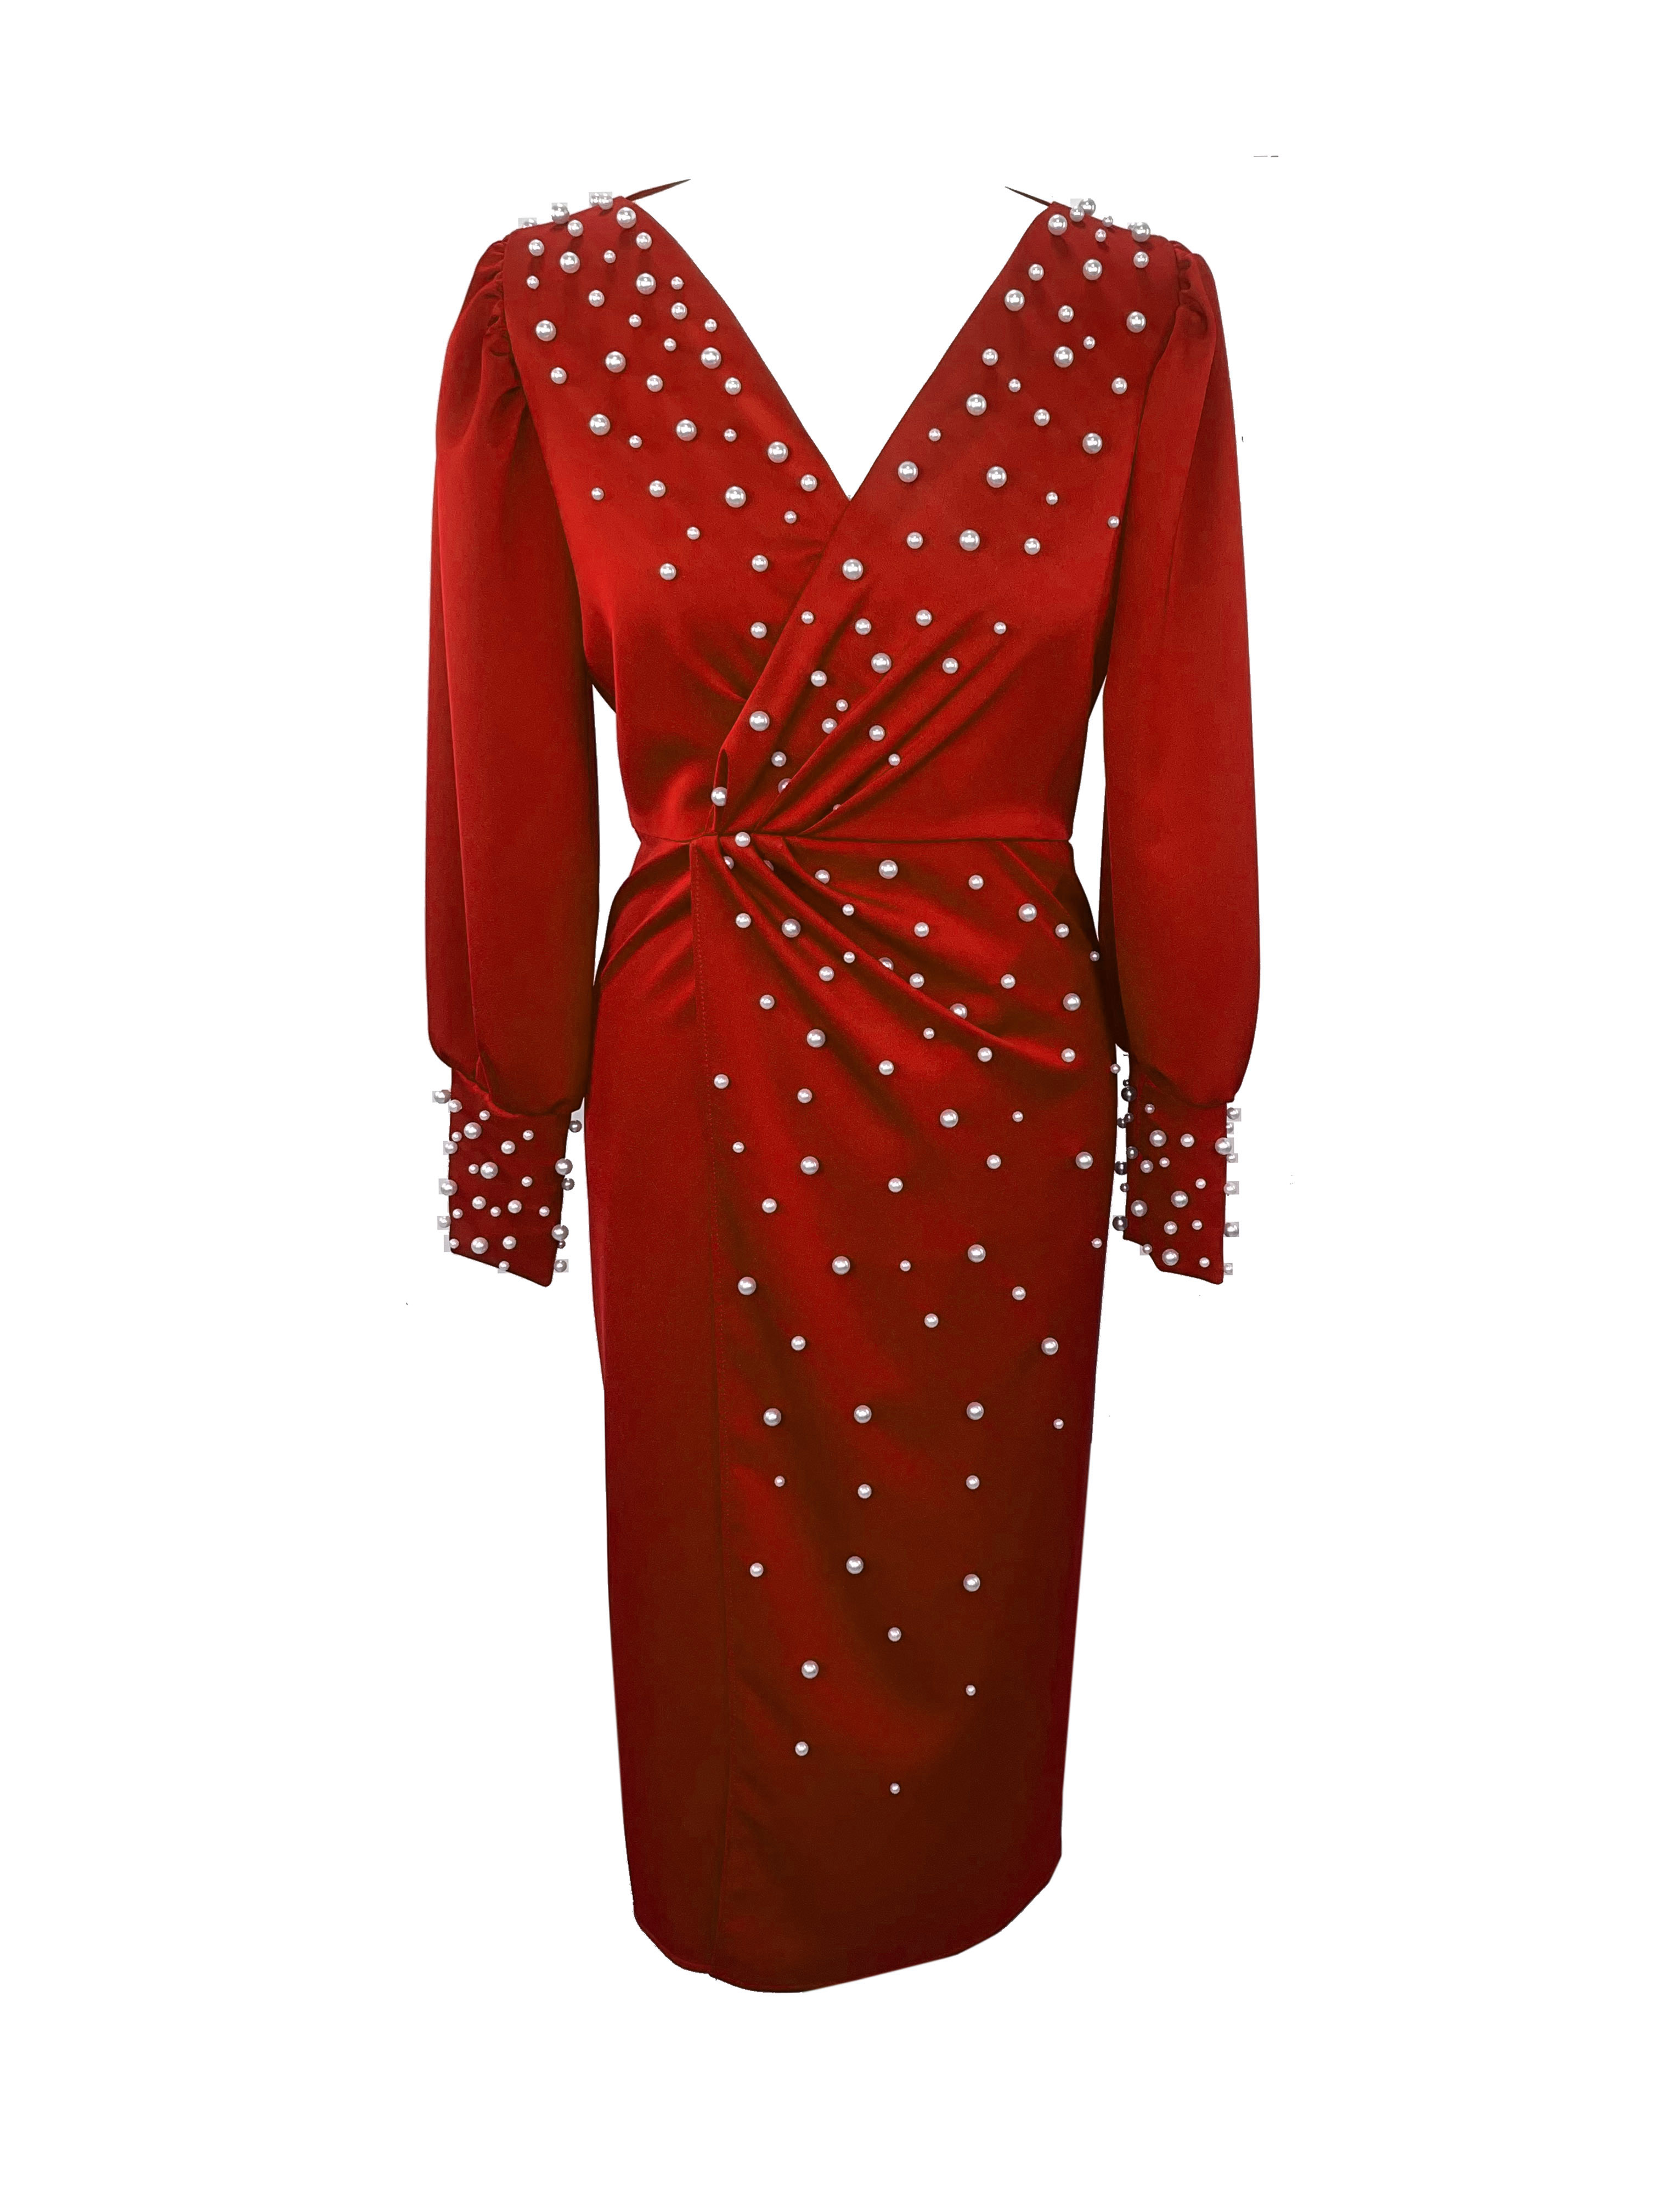 R24101 - RED 01 - AMINA red dress with pearls - Ambar Studio